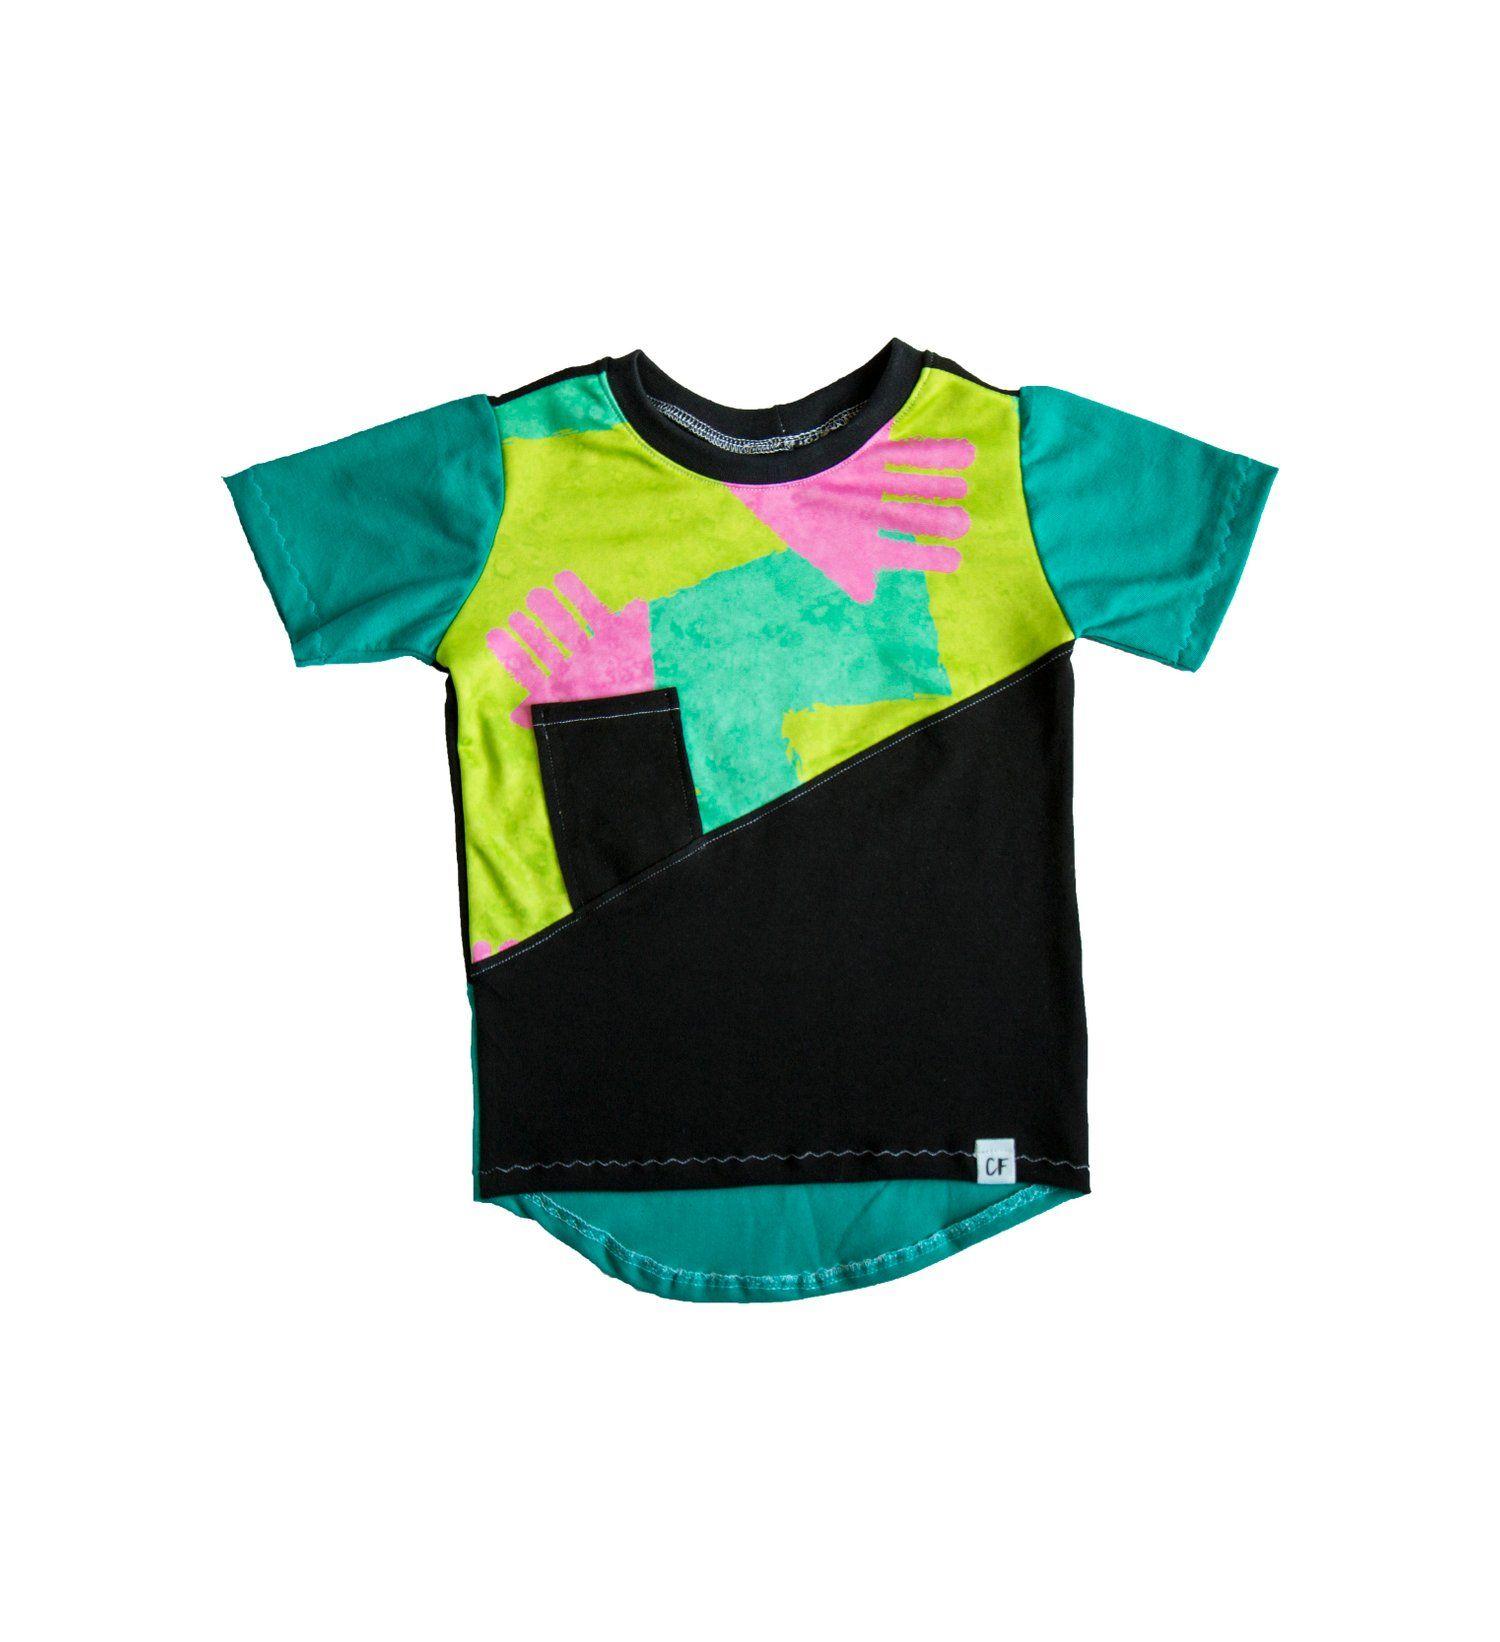 Clothing and Apparel NB Logo - Neon Graffiti Hi/Low Sideways Tee by Cheeky Face Apparel. A super ...